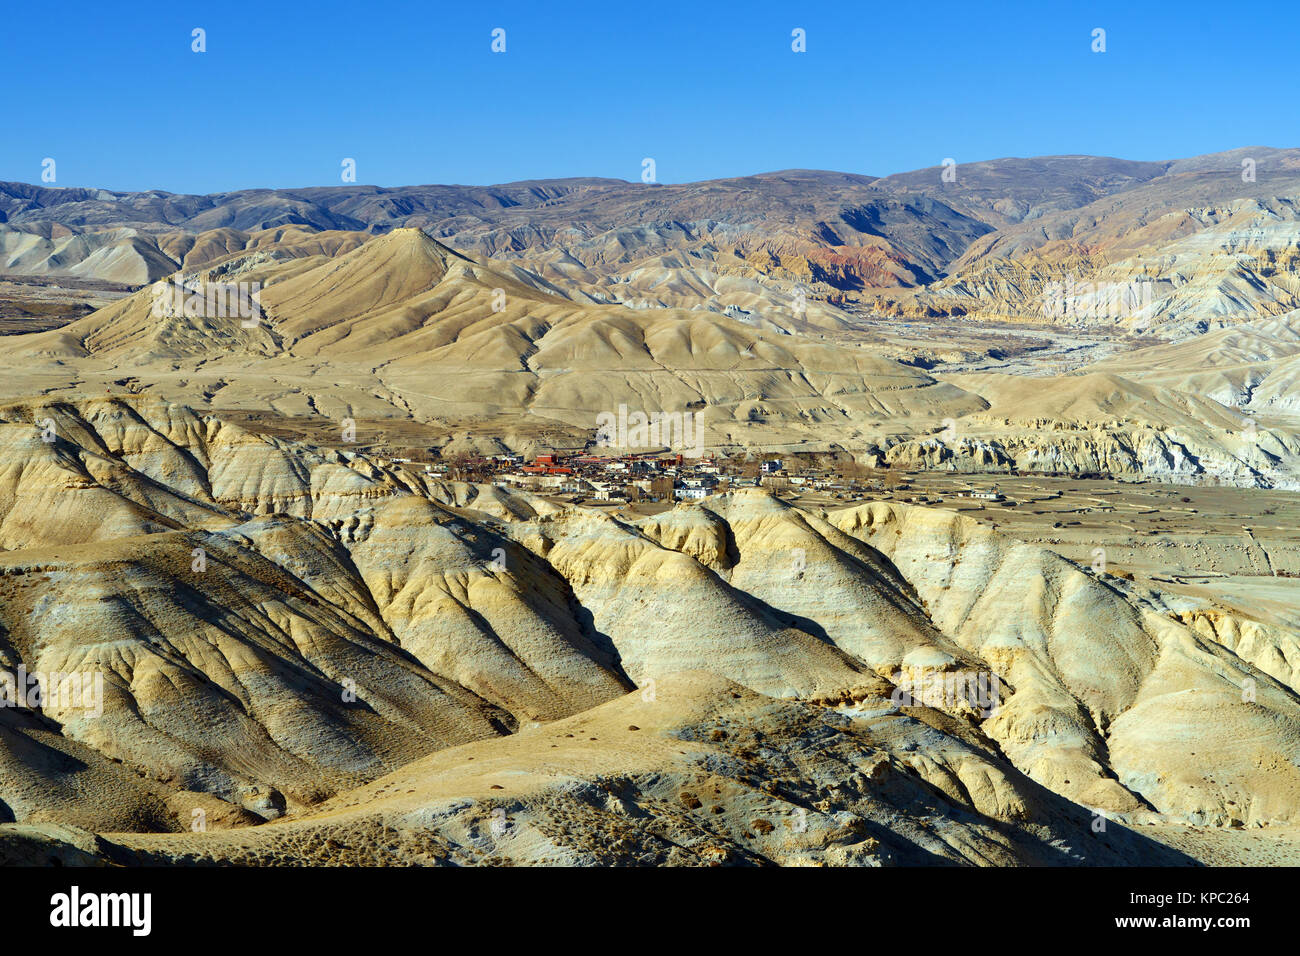 Lo Manthang, capital of Upper Mustang, viewed from a distance amidst a barren desertic landscape. Stock Photo